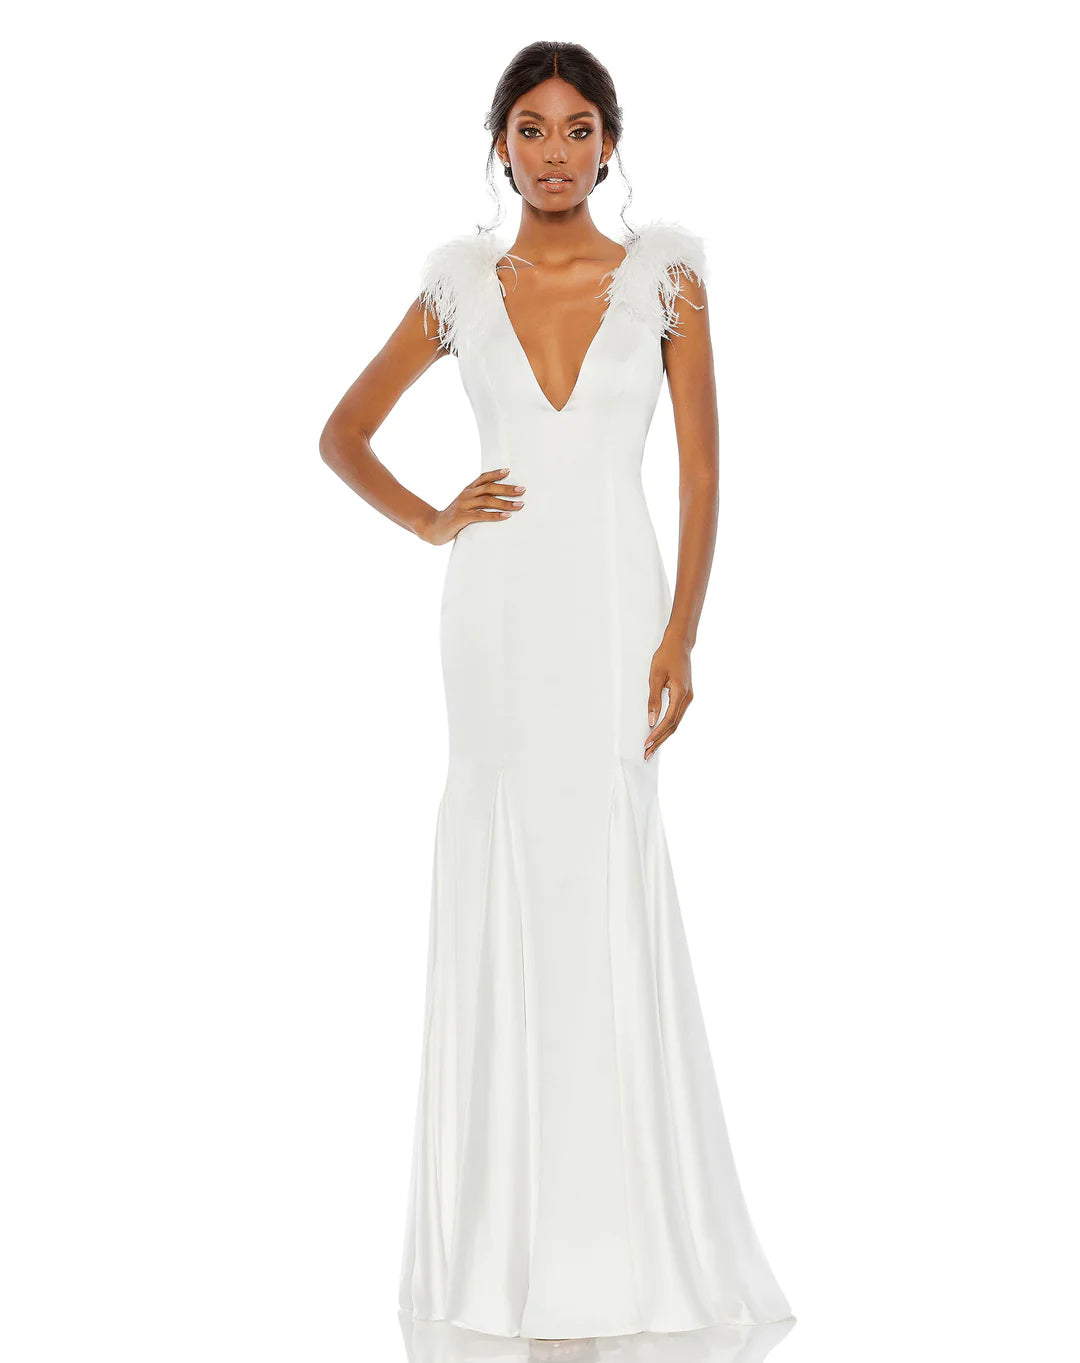 Wedding dress: how to choose a neckline for small breasts?